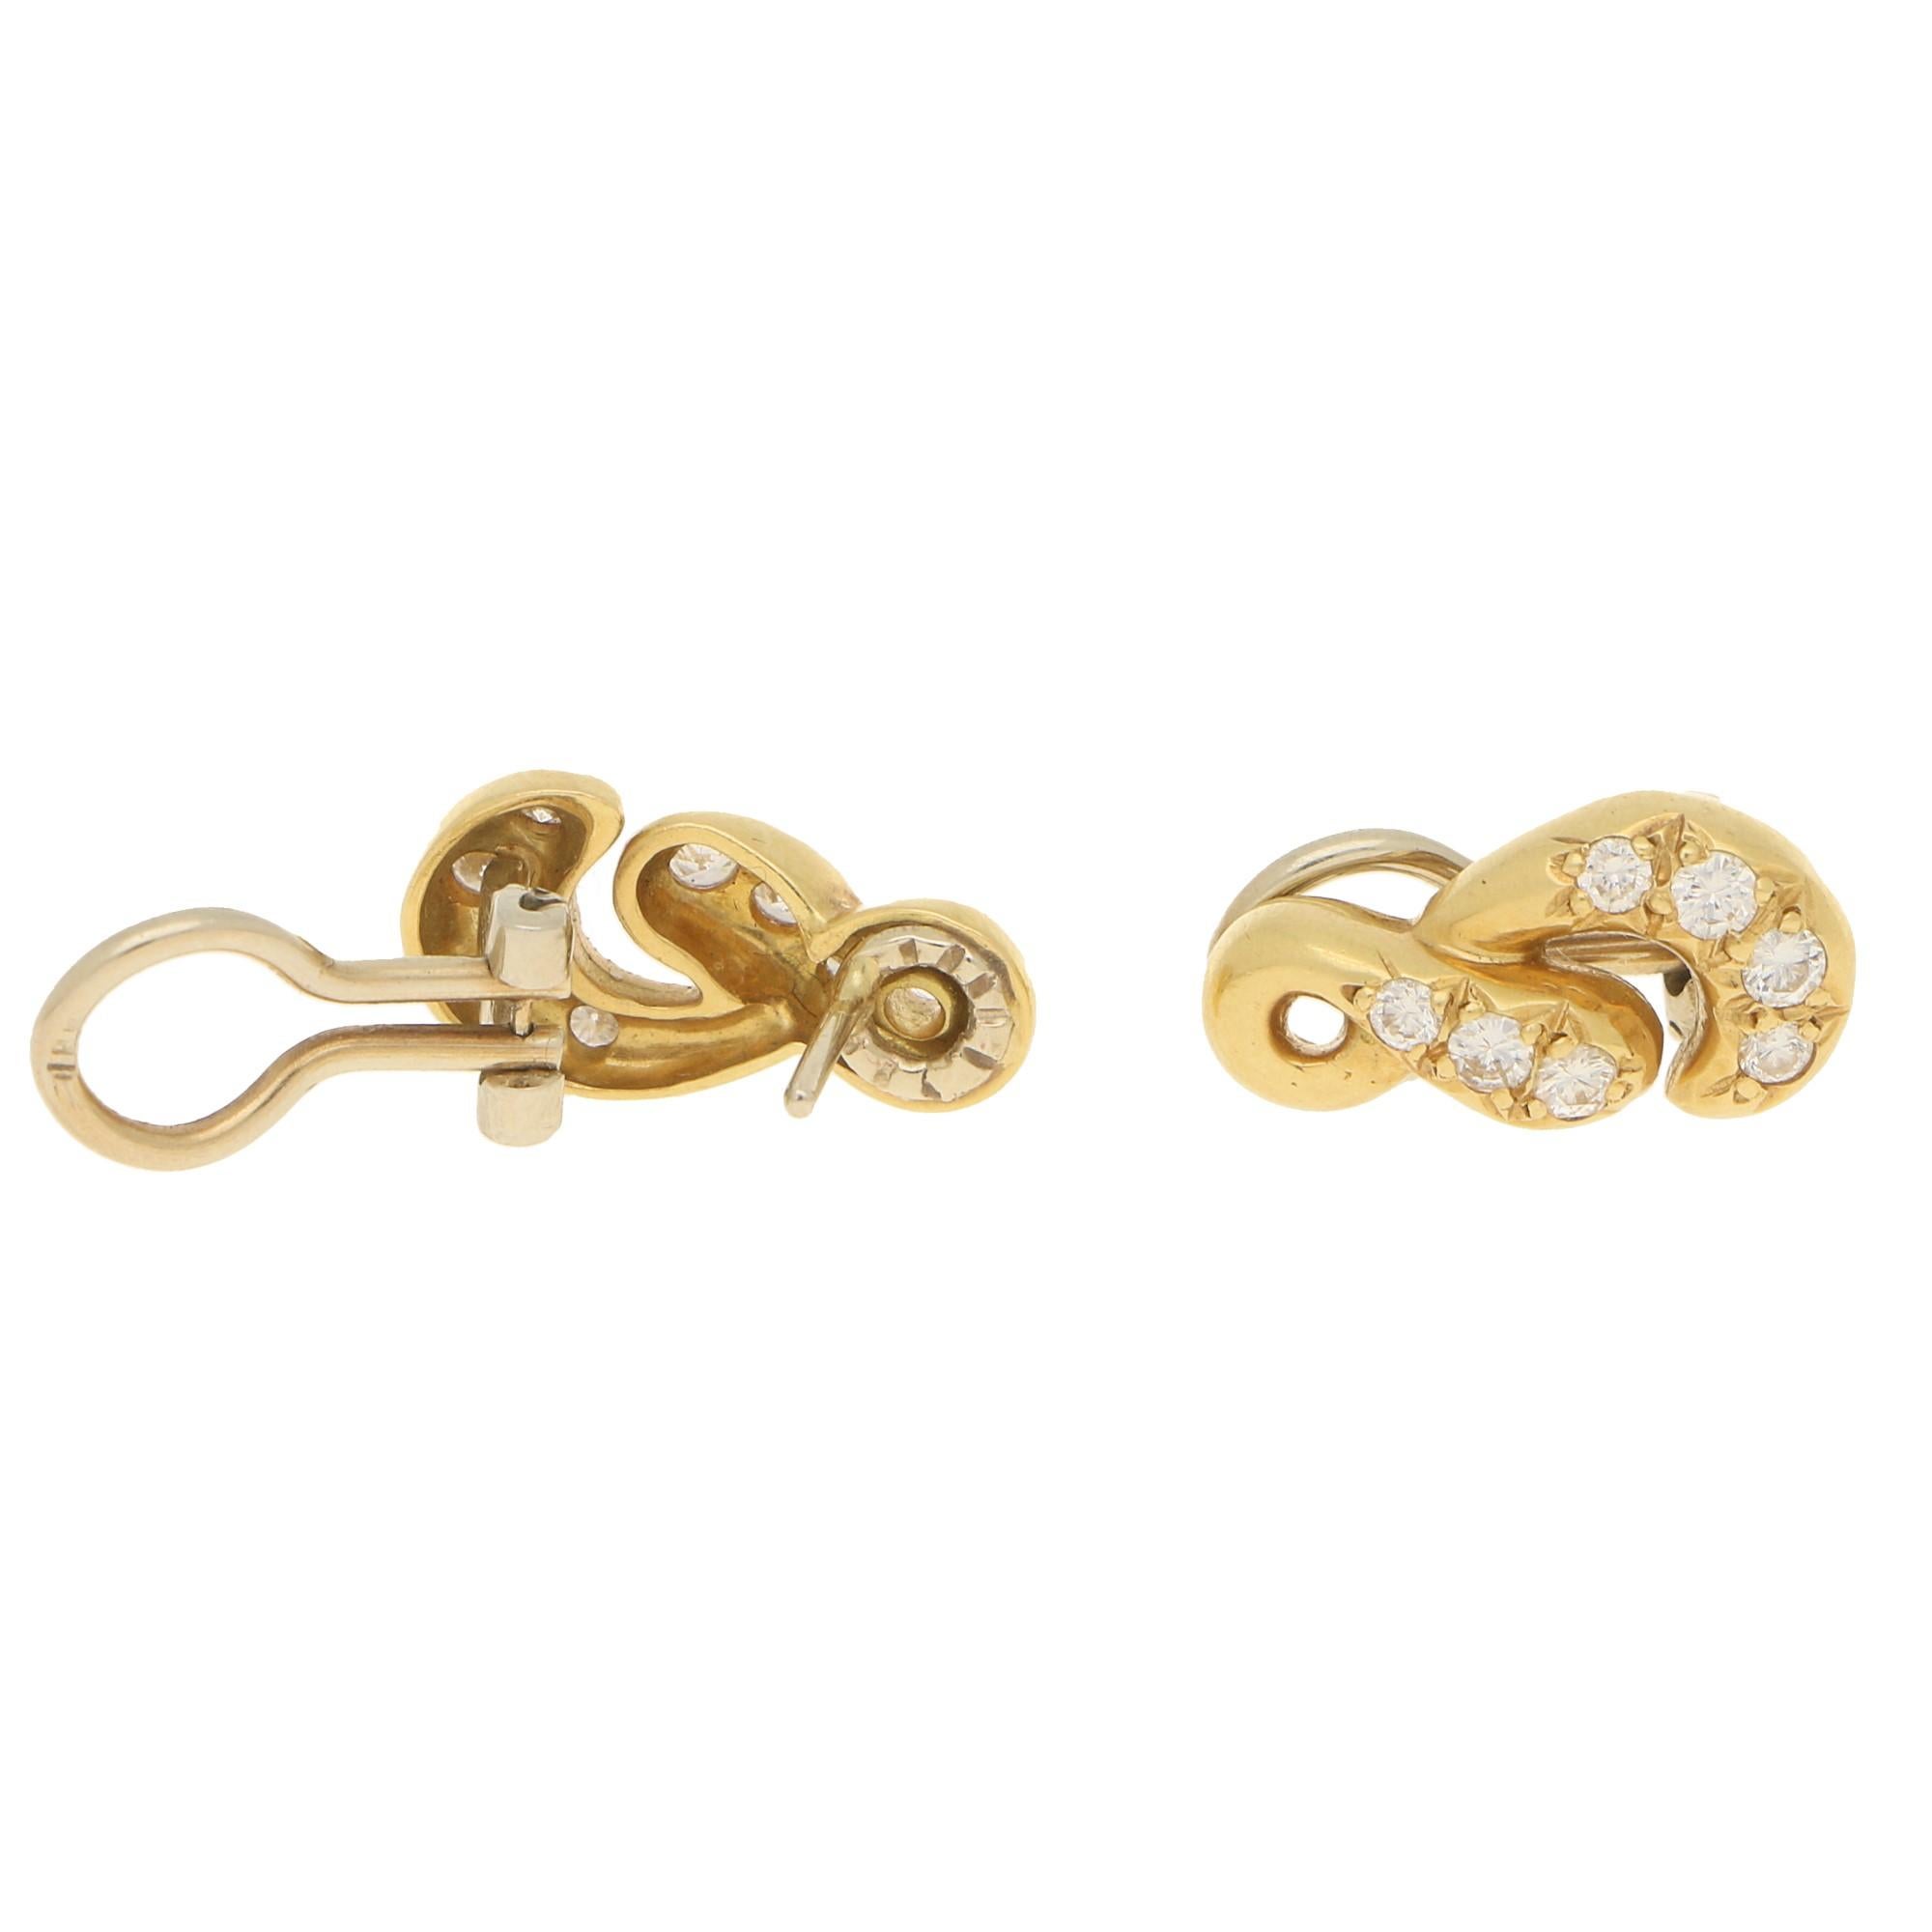 A lovely pair of vintage diamond figure of eight earrings set in 18k yellow and white gold. 
Each earring is designed as a stylised figure of eight motif in yellow gold and is grain-set throughout with seven round brilliant-cut diamonds. The motif